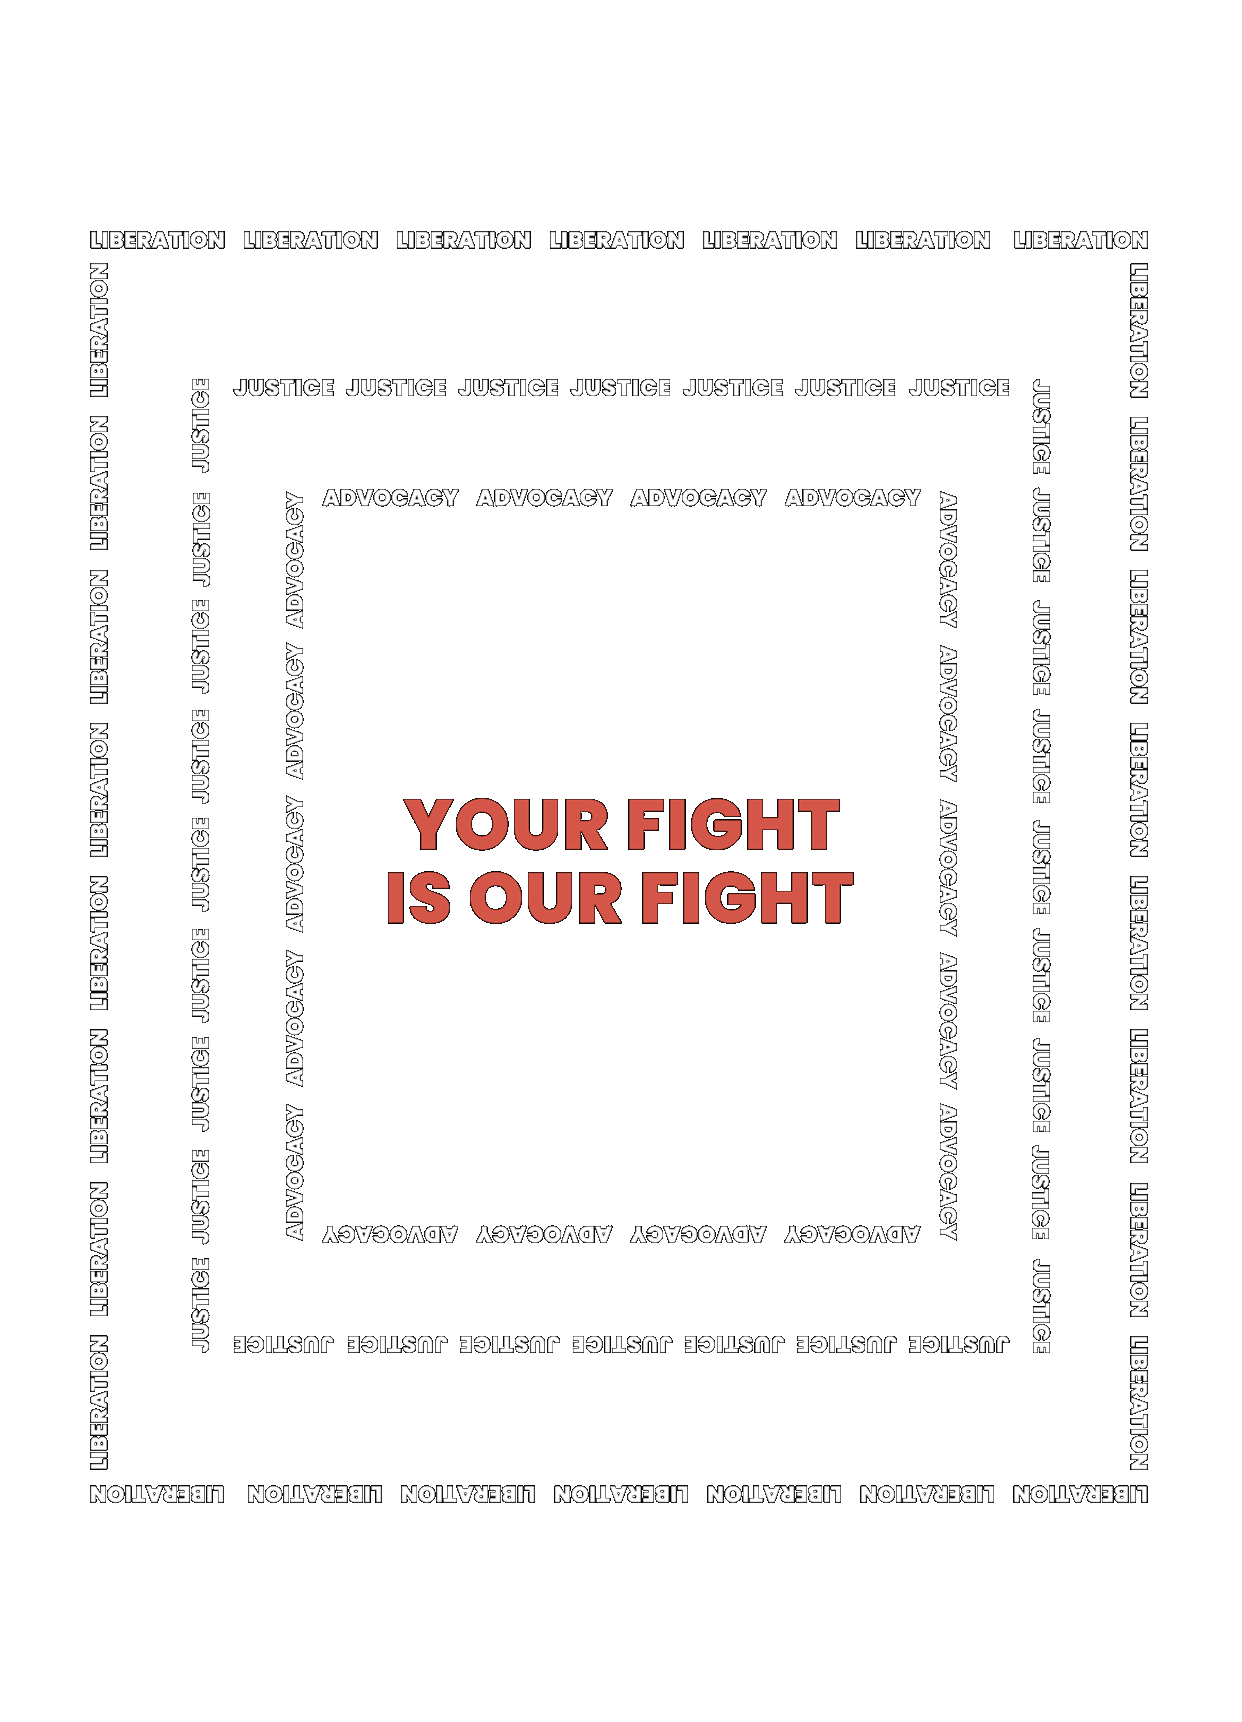 Your Fight is Our Fight graphic